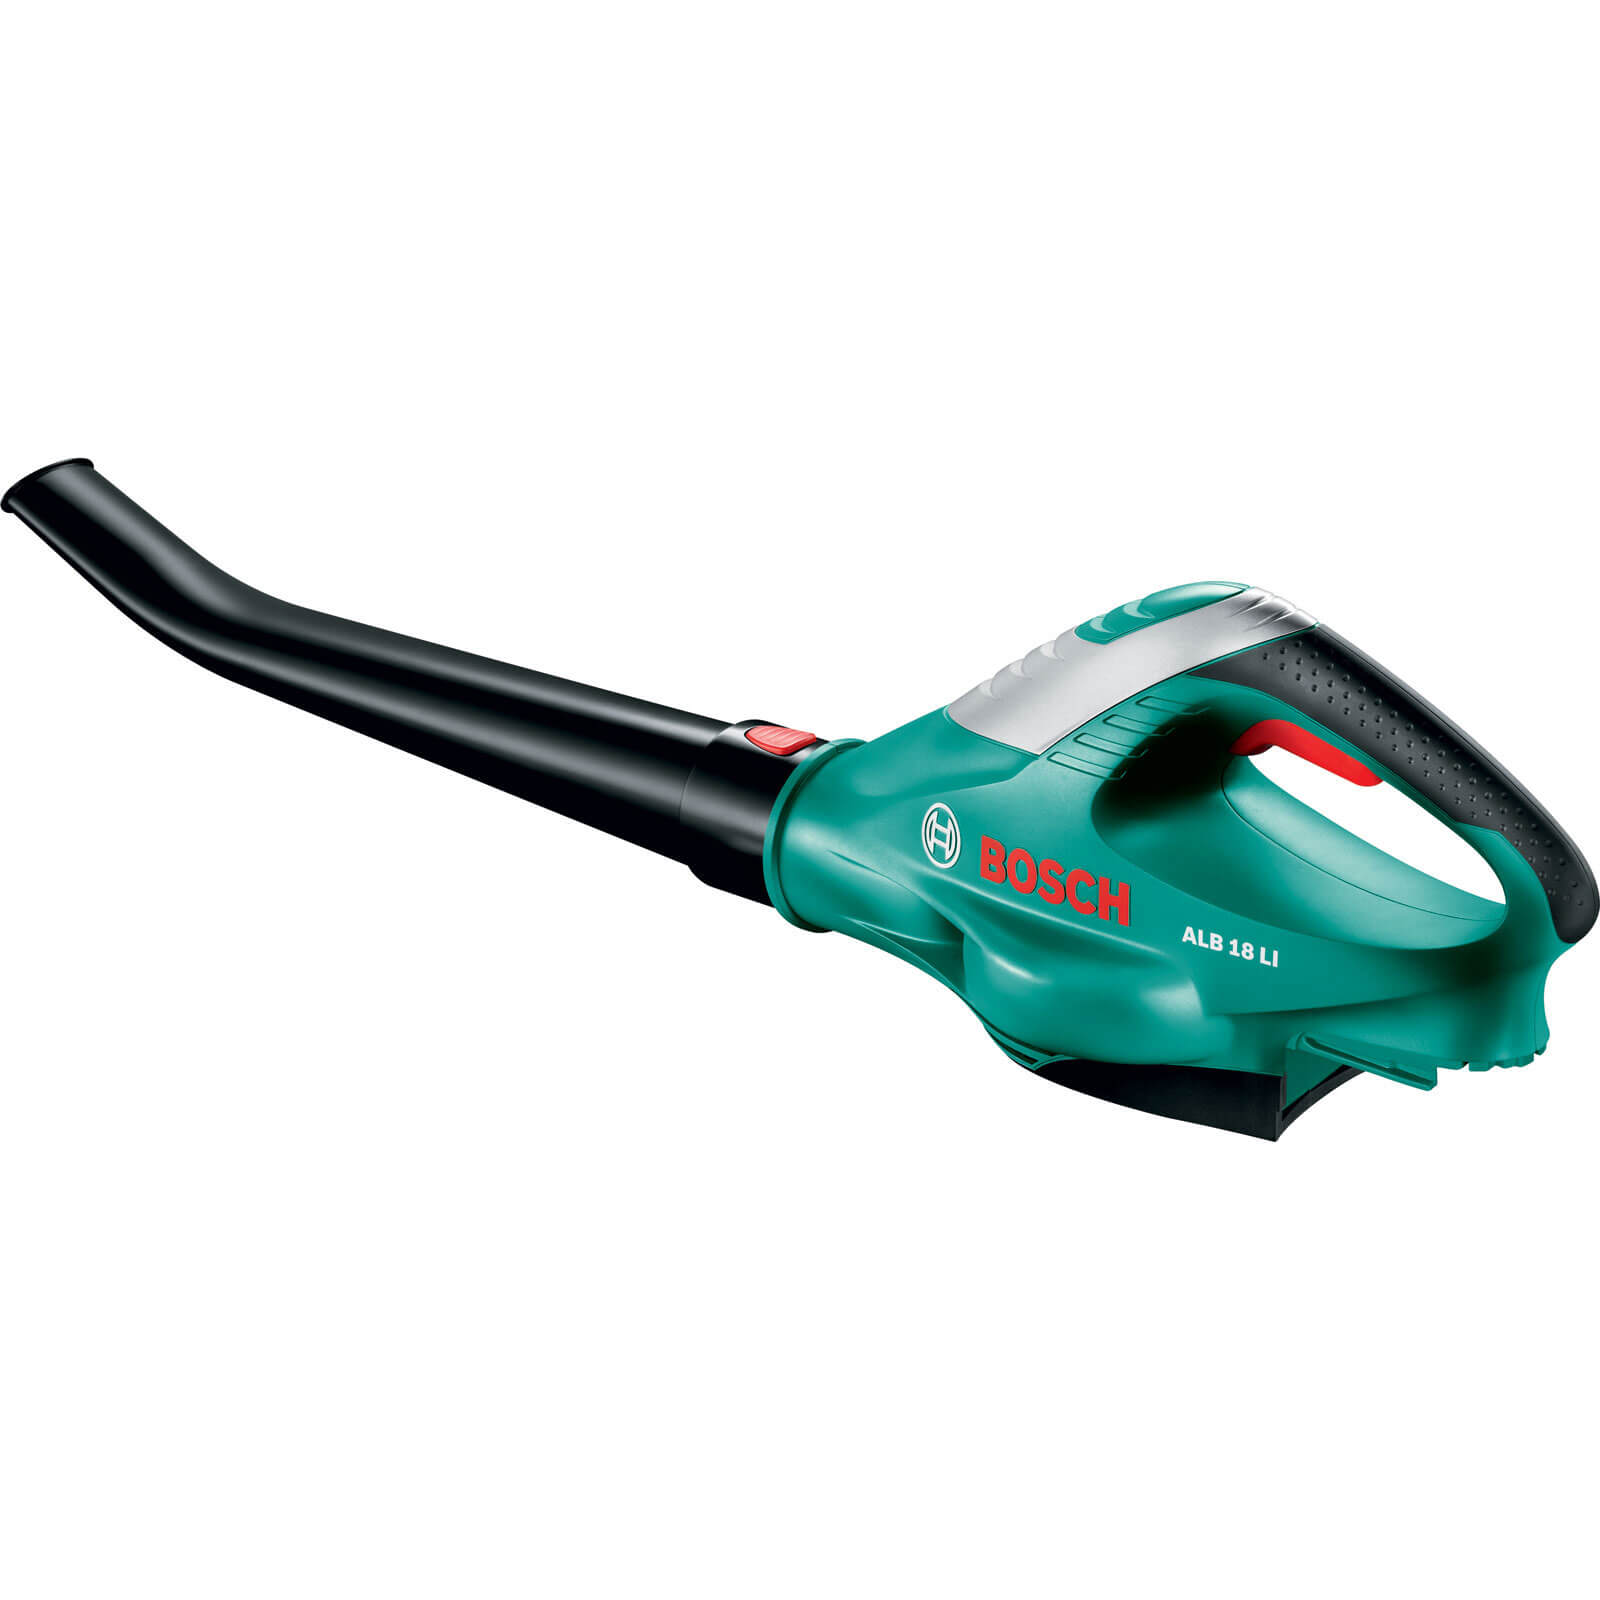 Bosch POWER4ALL ALB 18 LI 18v Cordless Garden Leaf Blower without Battery or Charger